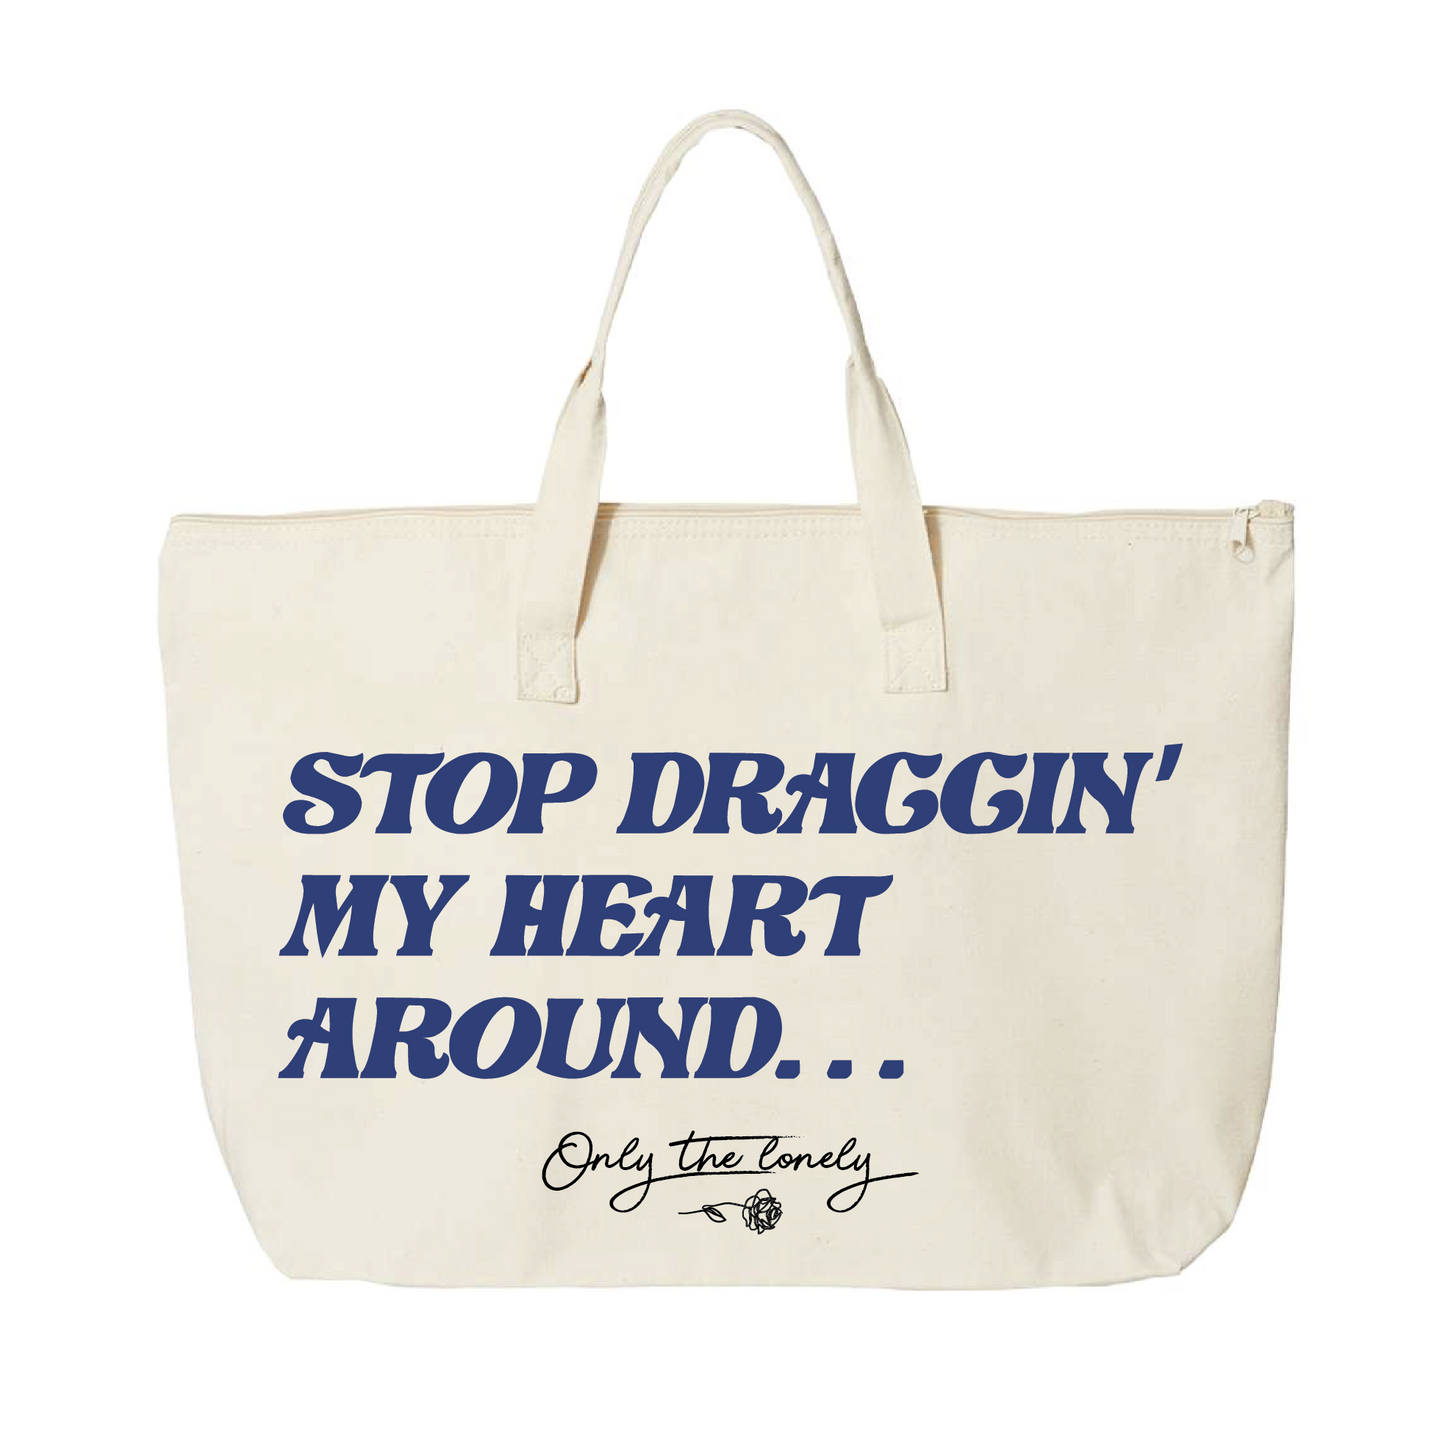 ONLY THE LONELY "STOP DRAGGIN' MY HEART AROUND" TOTE BAG